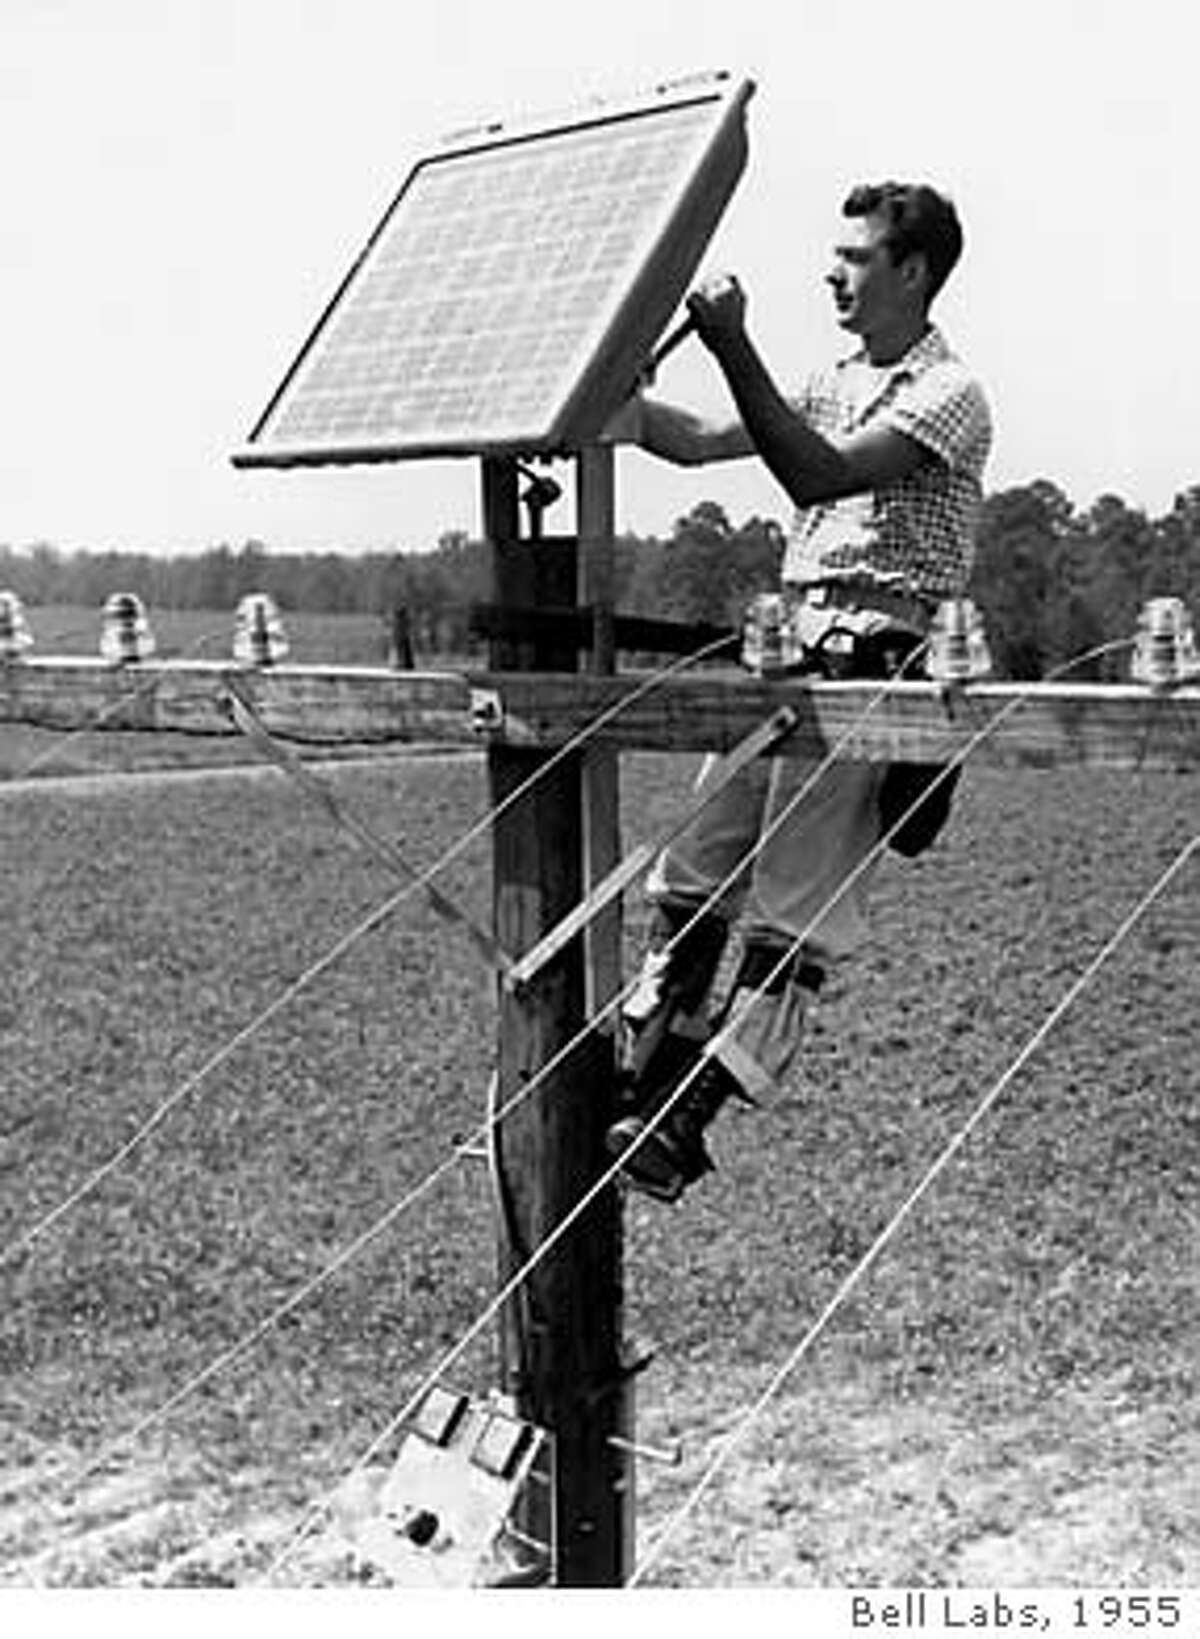 / for: Business The original Bell Solar Battery being used in an early test in 1955 in Americus, Ga., near Atlanta. Bell Labs applied this breakthrough technology to provide remote power for improving telephone service. Solar Cells continue to be used today as a green source of energy and for providing electricity to remote locations.